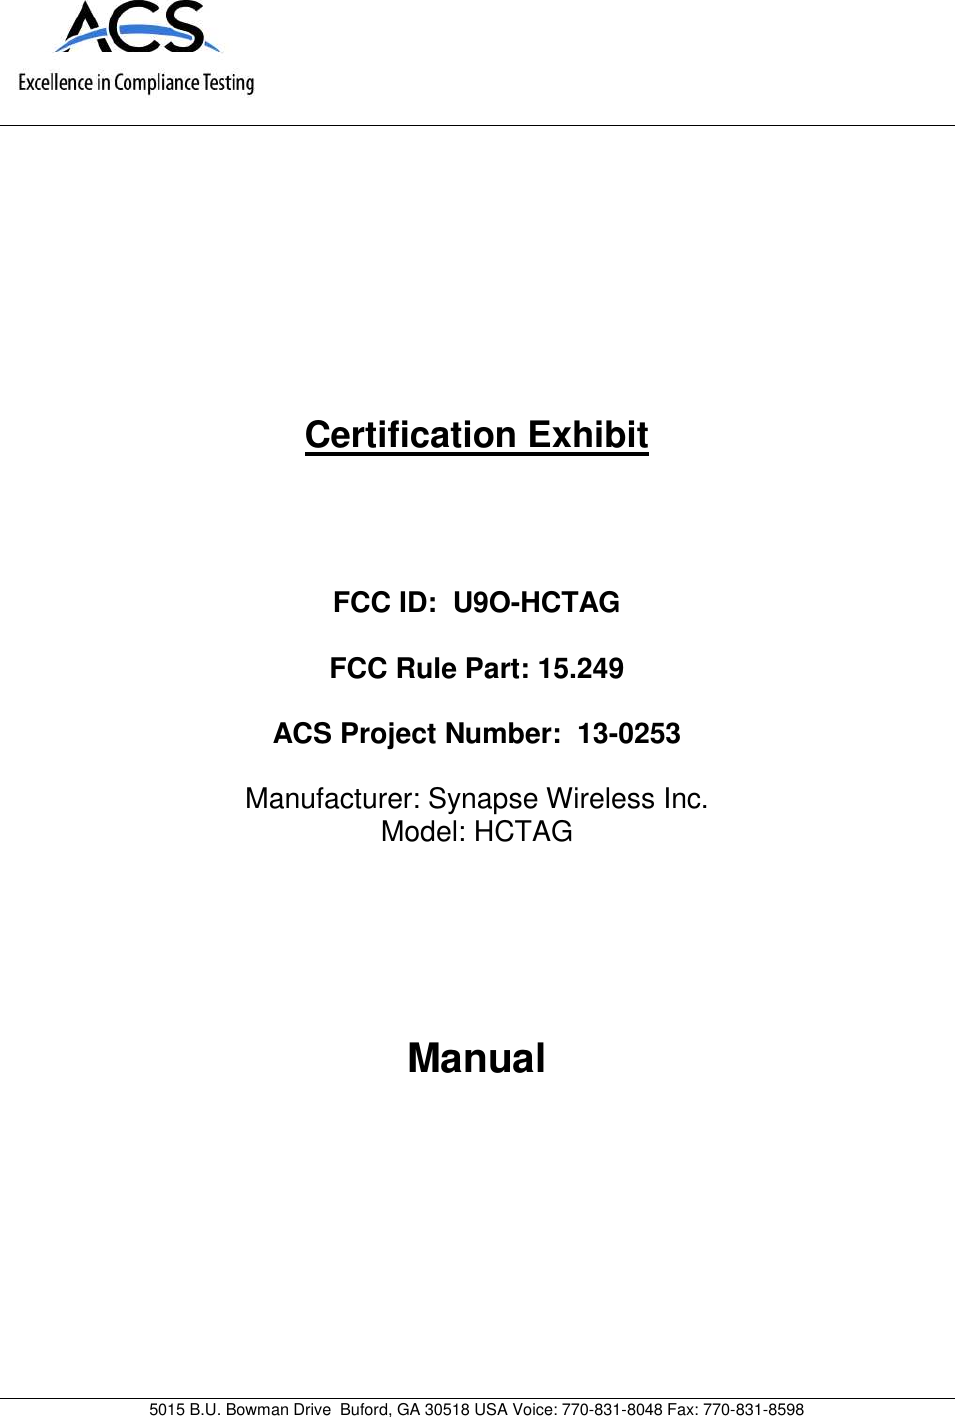 5015 B.U. Bowman Drive Buford, GA 30518 USA Voice: 770-831-8048 Fax: 770-831-8598Certification ExhibitFCC ID: U9O-HCTAGFCC Rule Part: 15.249ACS Project Number: 13-0253Manufacturer: Synapse Wireless Inc.Model: HCTAGManual